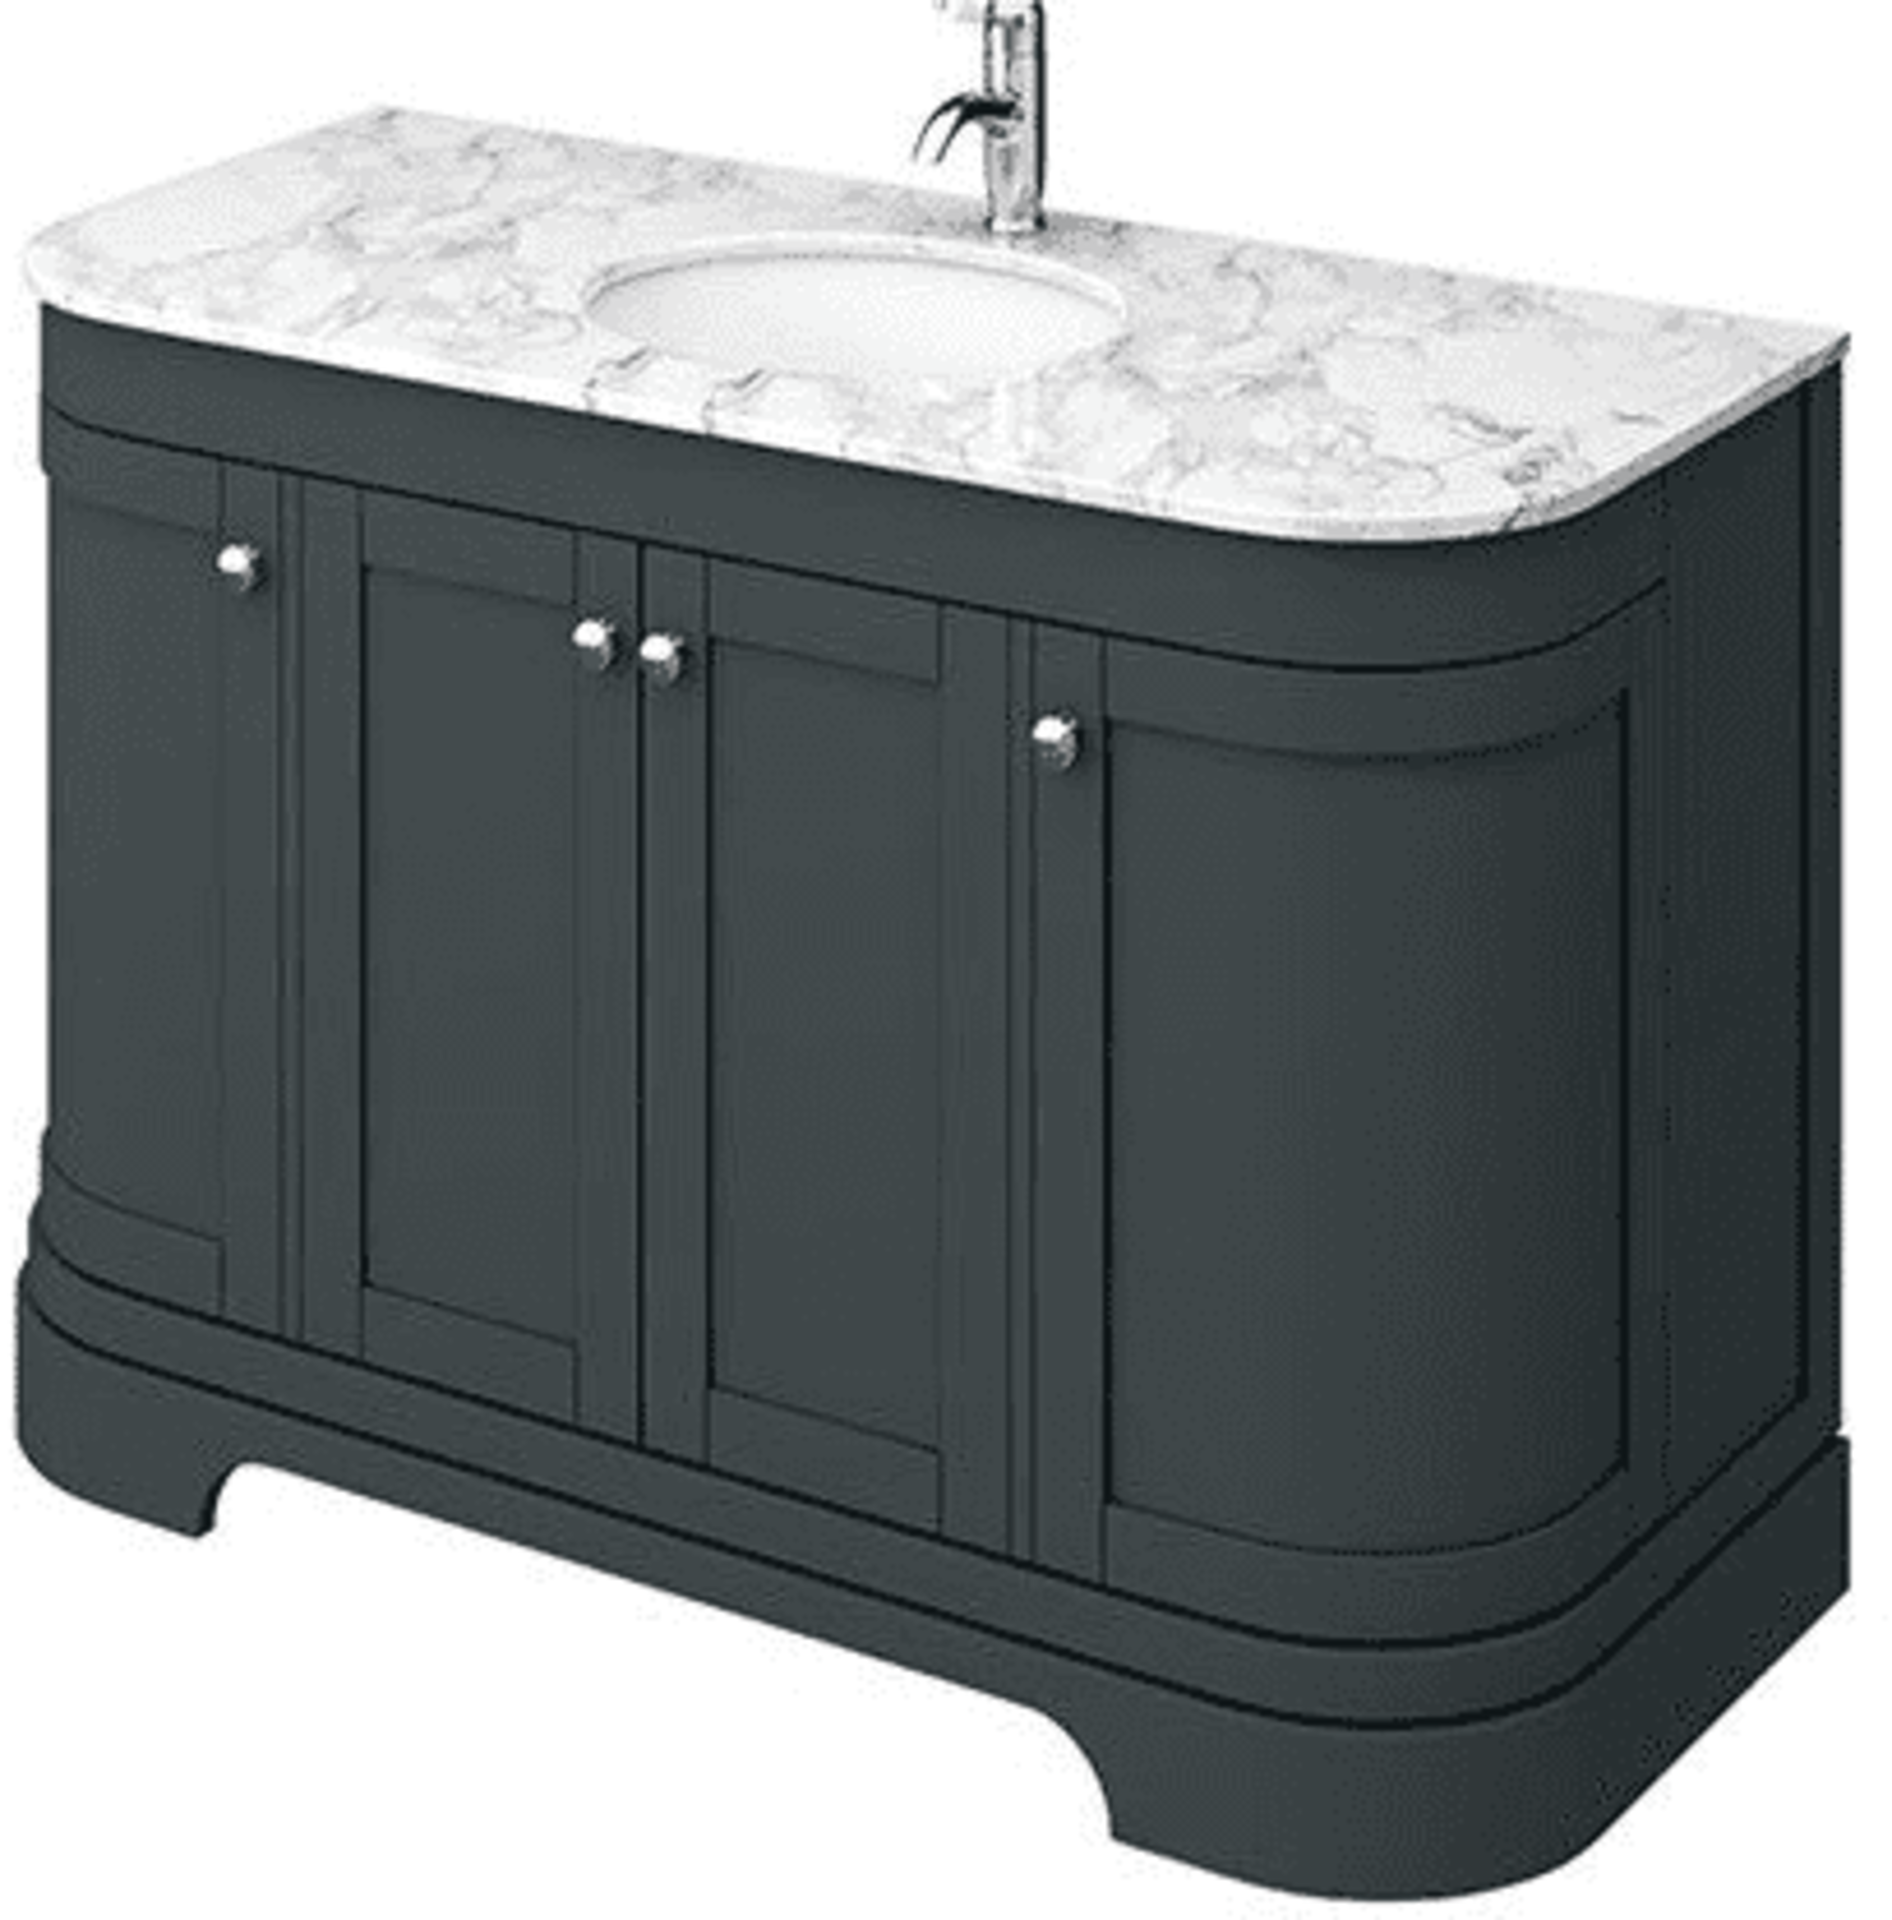 New & Boxed 1200 mm York Charcoal Marble Top Vanity Unit - 1200 mm. RRP £3,499. - Image 3 of 3